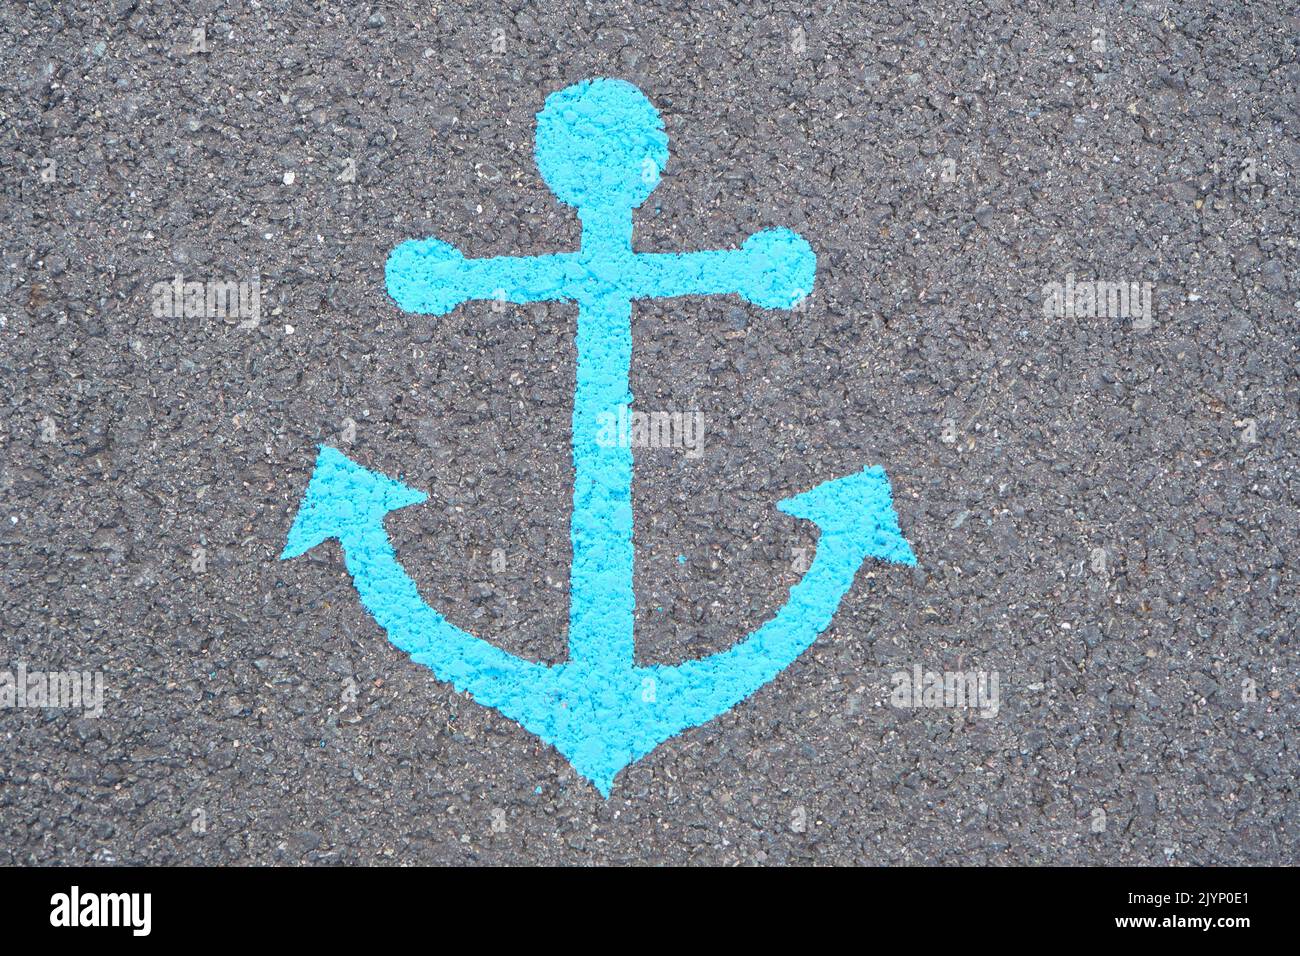 Image of an anchor painted in blue on a asphalt road at the Port of Sydney Nova Scotia. Stock Photo